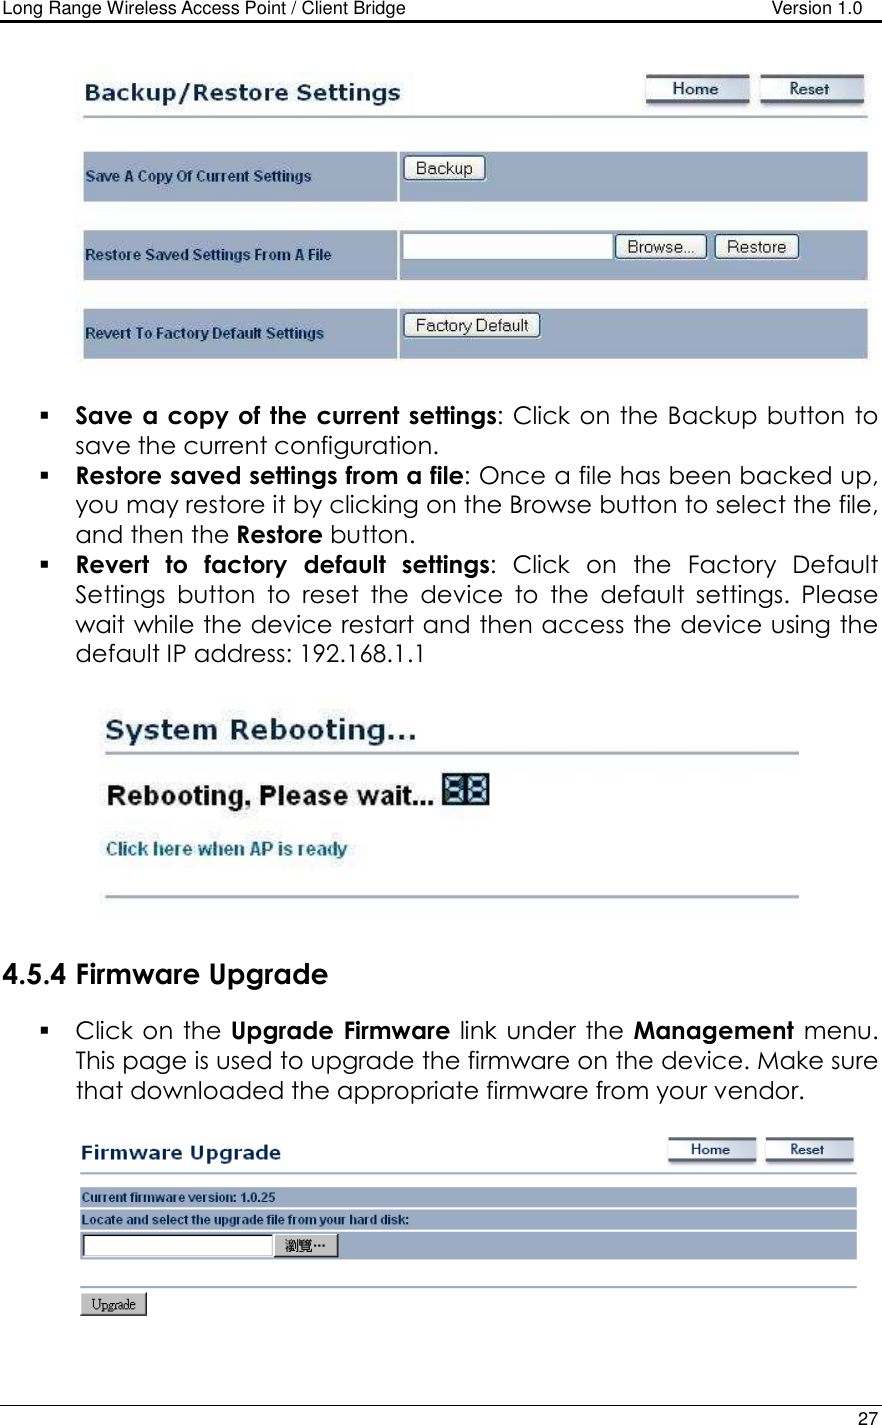 Long Range Wireless Access Point / Client Bridge                                   Version 1.0    27     Save a copy of  the current settings: Click on the Backup button to save the current configuration.   Restore saved settings from a file: Once a file has been backed up, you may restore it by clicking on the Browse button to select the file, and then the Restore button.    Revert  to  factory  default  settings:  Click  on  the  Factory  Default Settings  button  to  reset  the  device  to  the  default  settings.  Please wait while the device restart and then access the device using the default IP address: 192.168.1.1    4.5.4 Firmware Upgrade  Click on the  Upgrade  Firmware link under the Management  menu. This page is used to upgrade the firmware on the device. Make sure that downloaded the appropriate firmware from your vendor.     